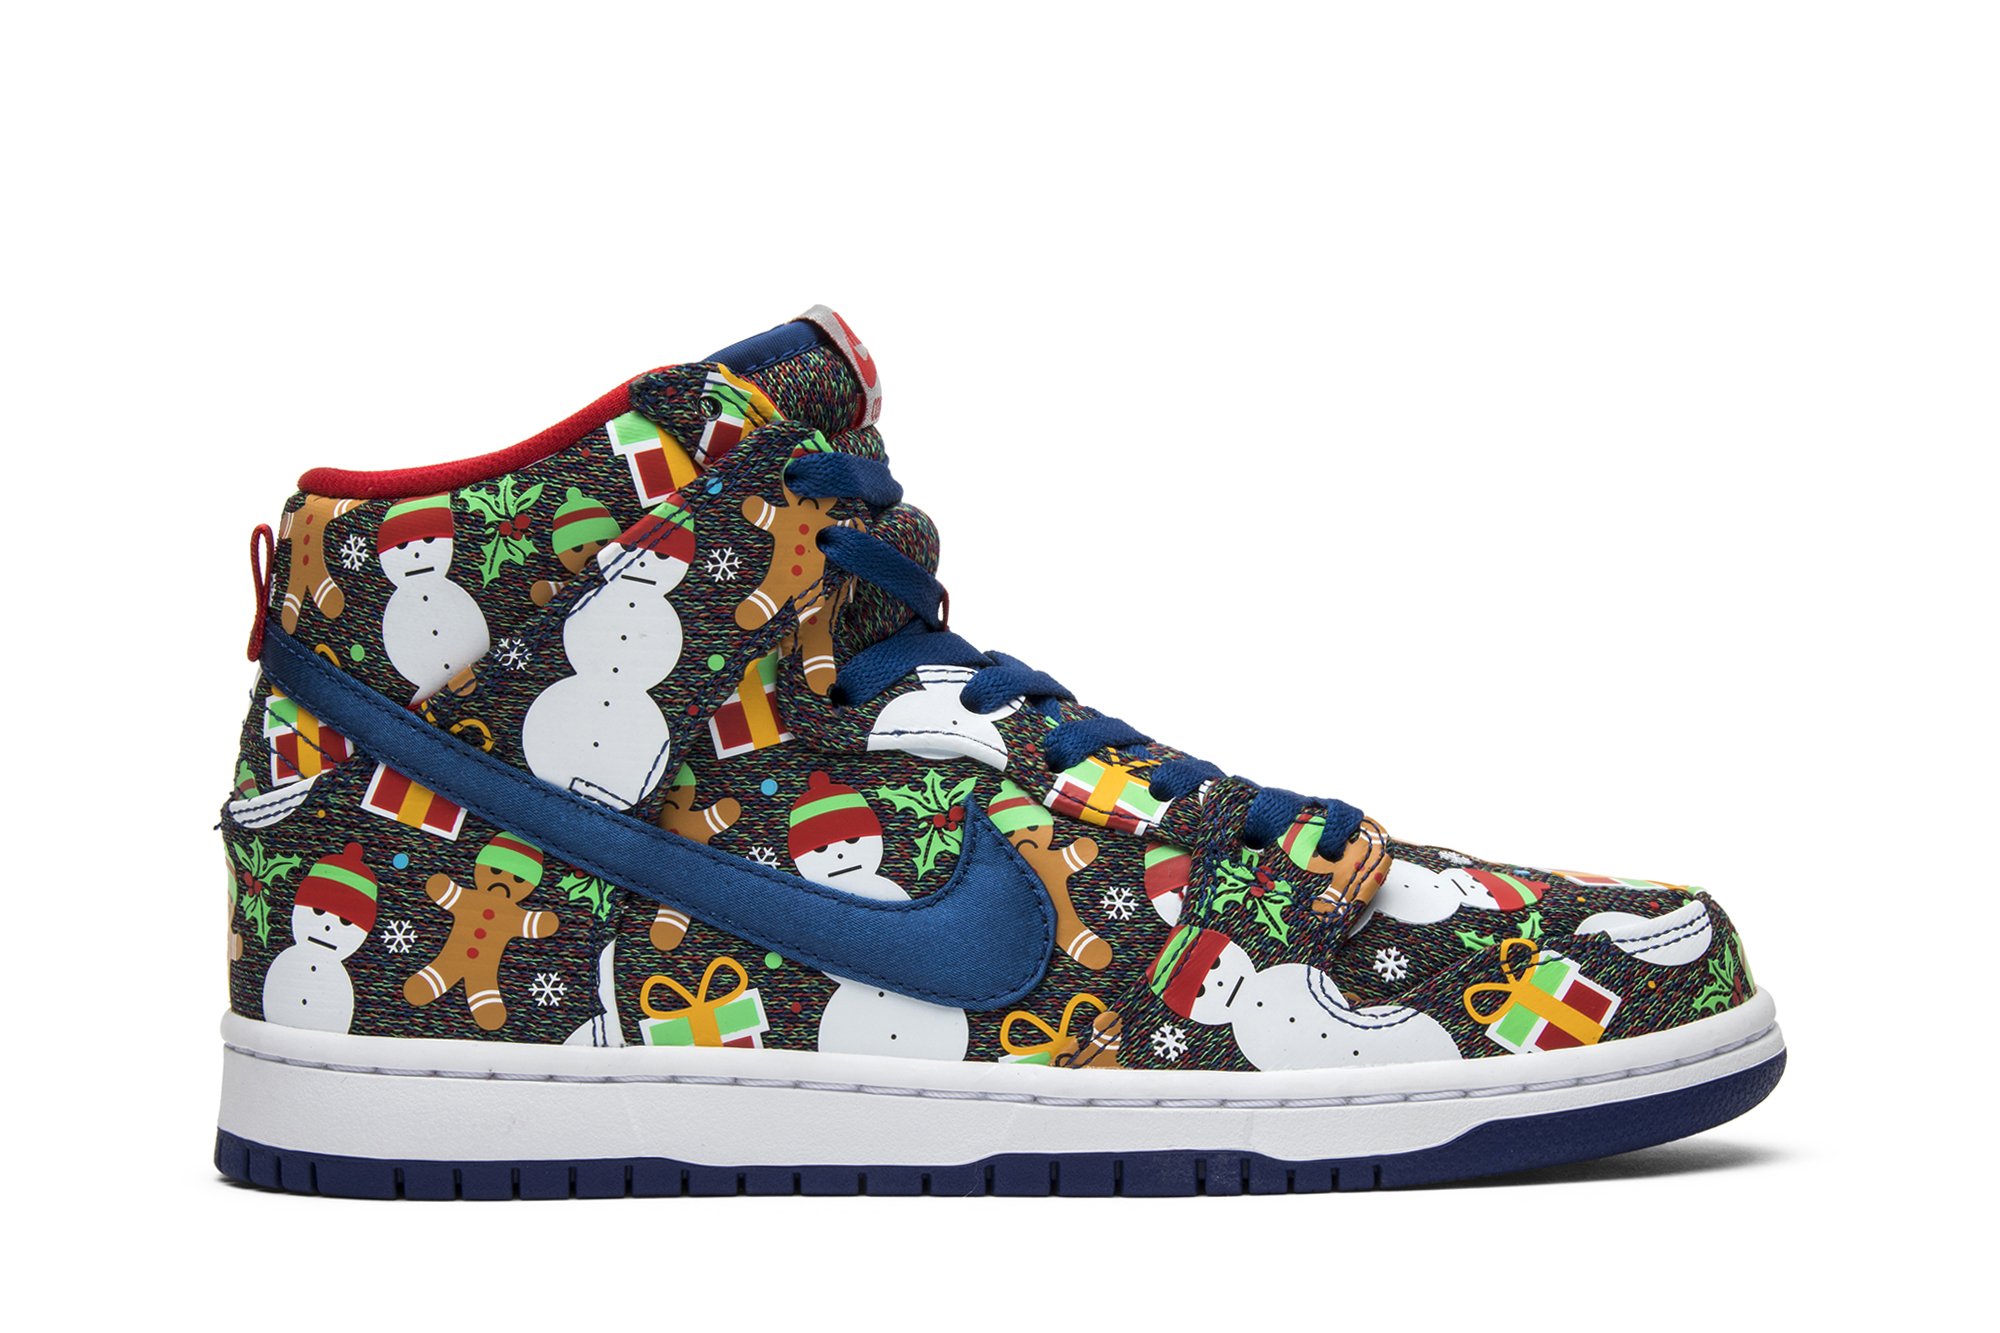 Concepts x SB Dunk Pro High 'Ugly Christmas Sweater' 2017